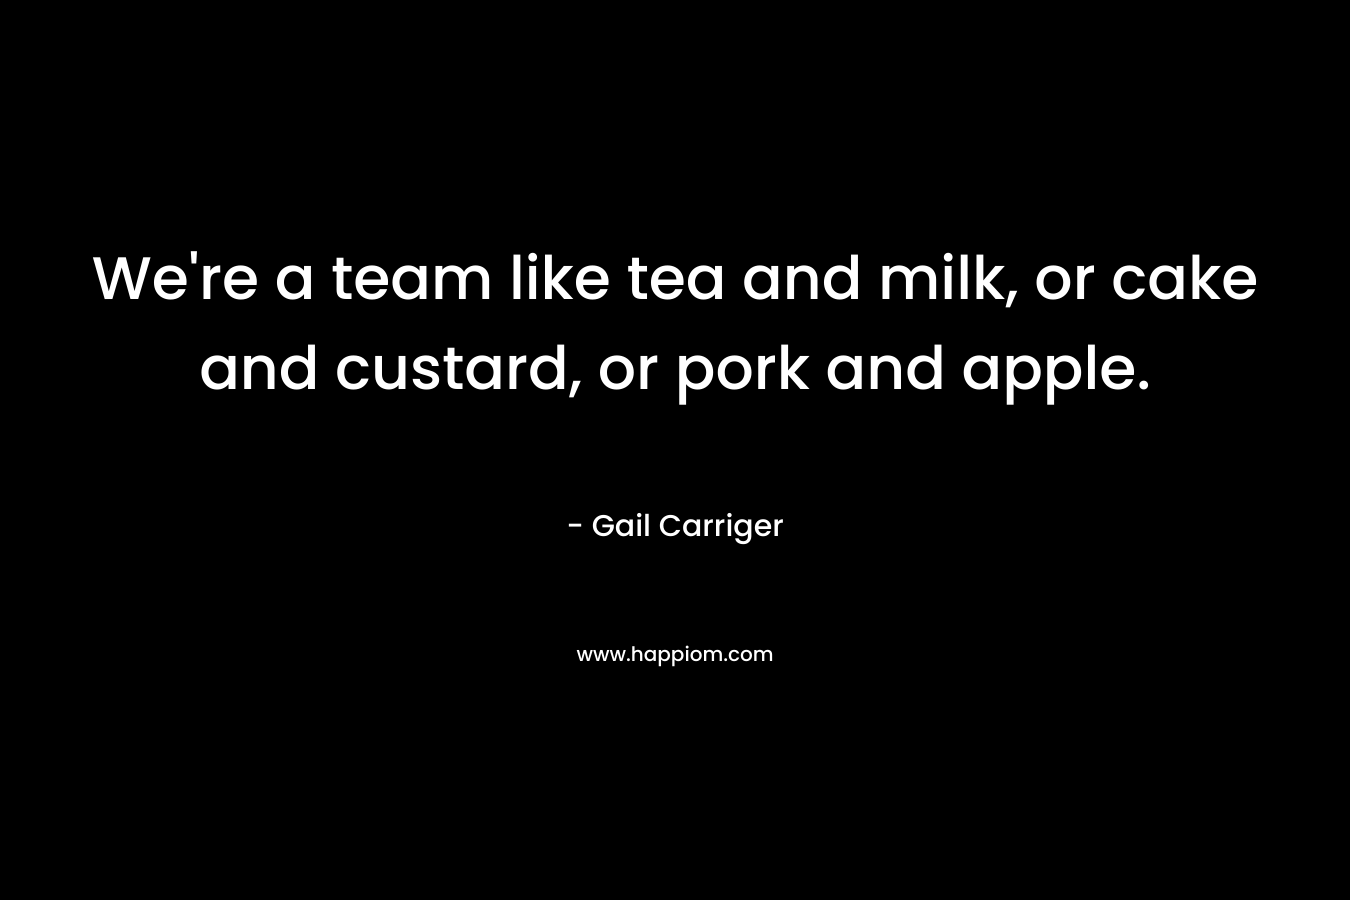 We're a team like tea and milk, or cake and custard, or pork and apple.